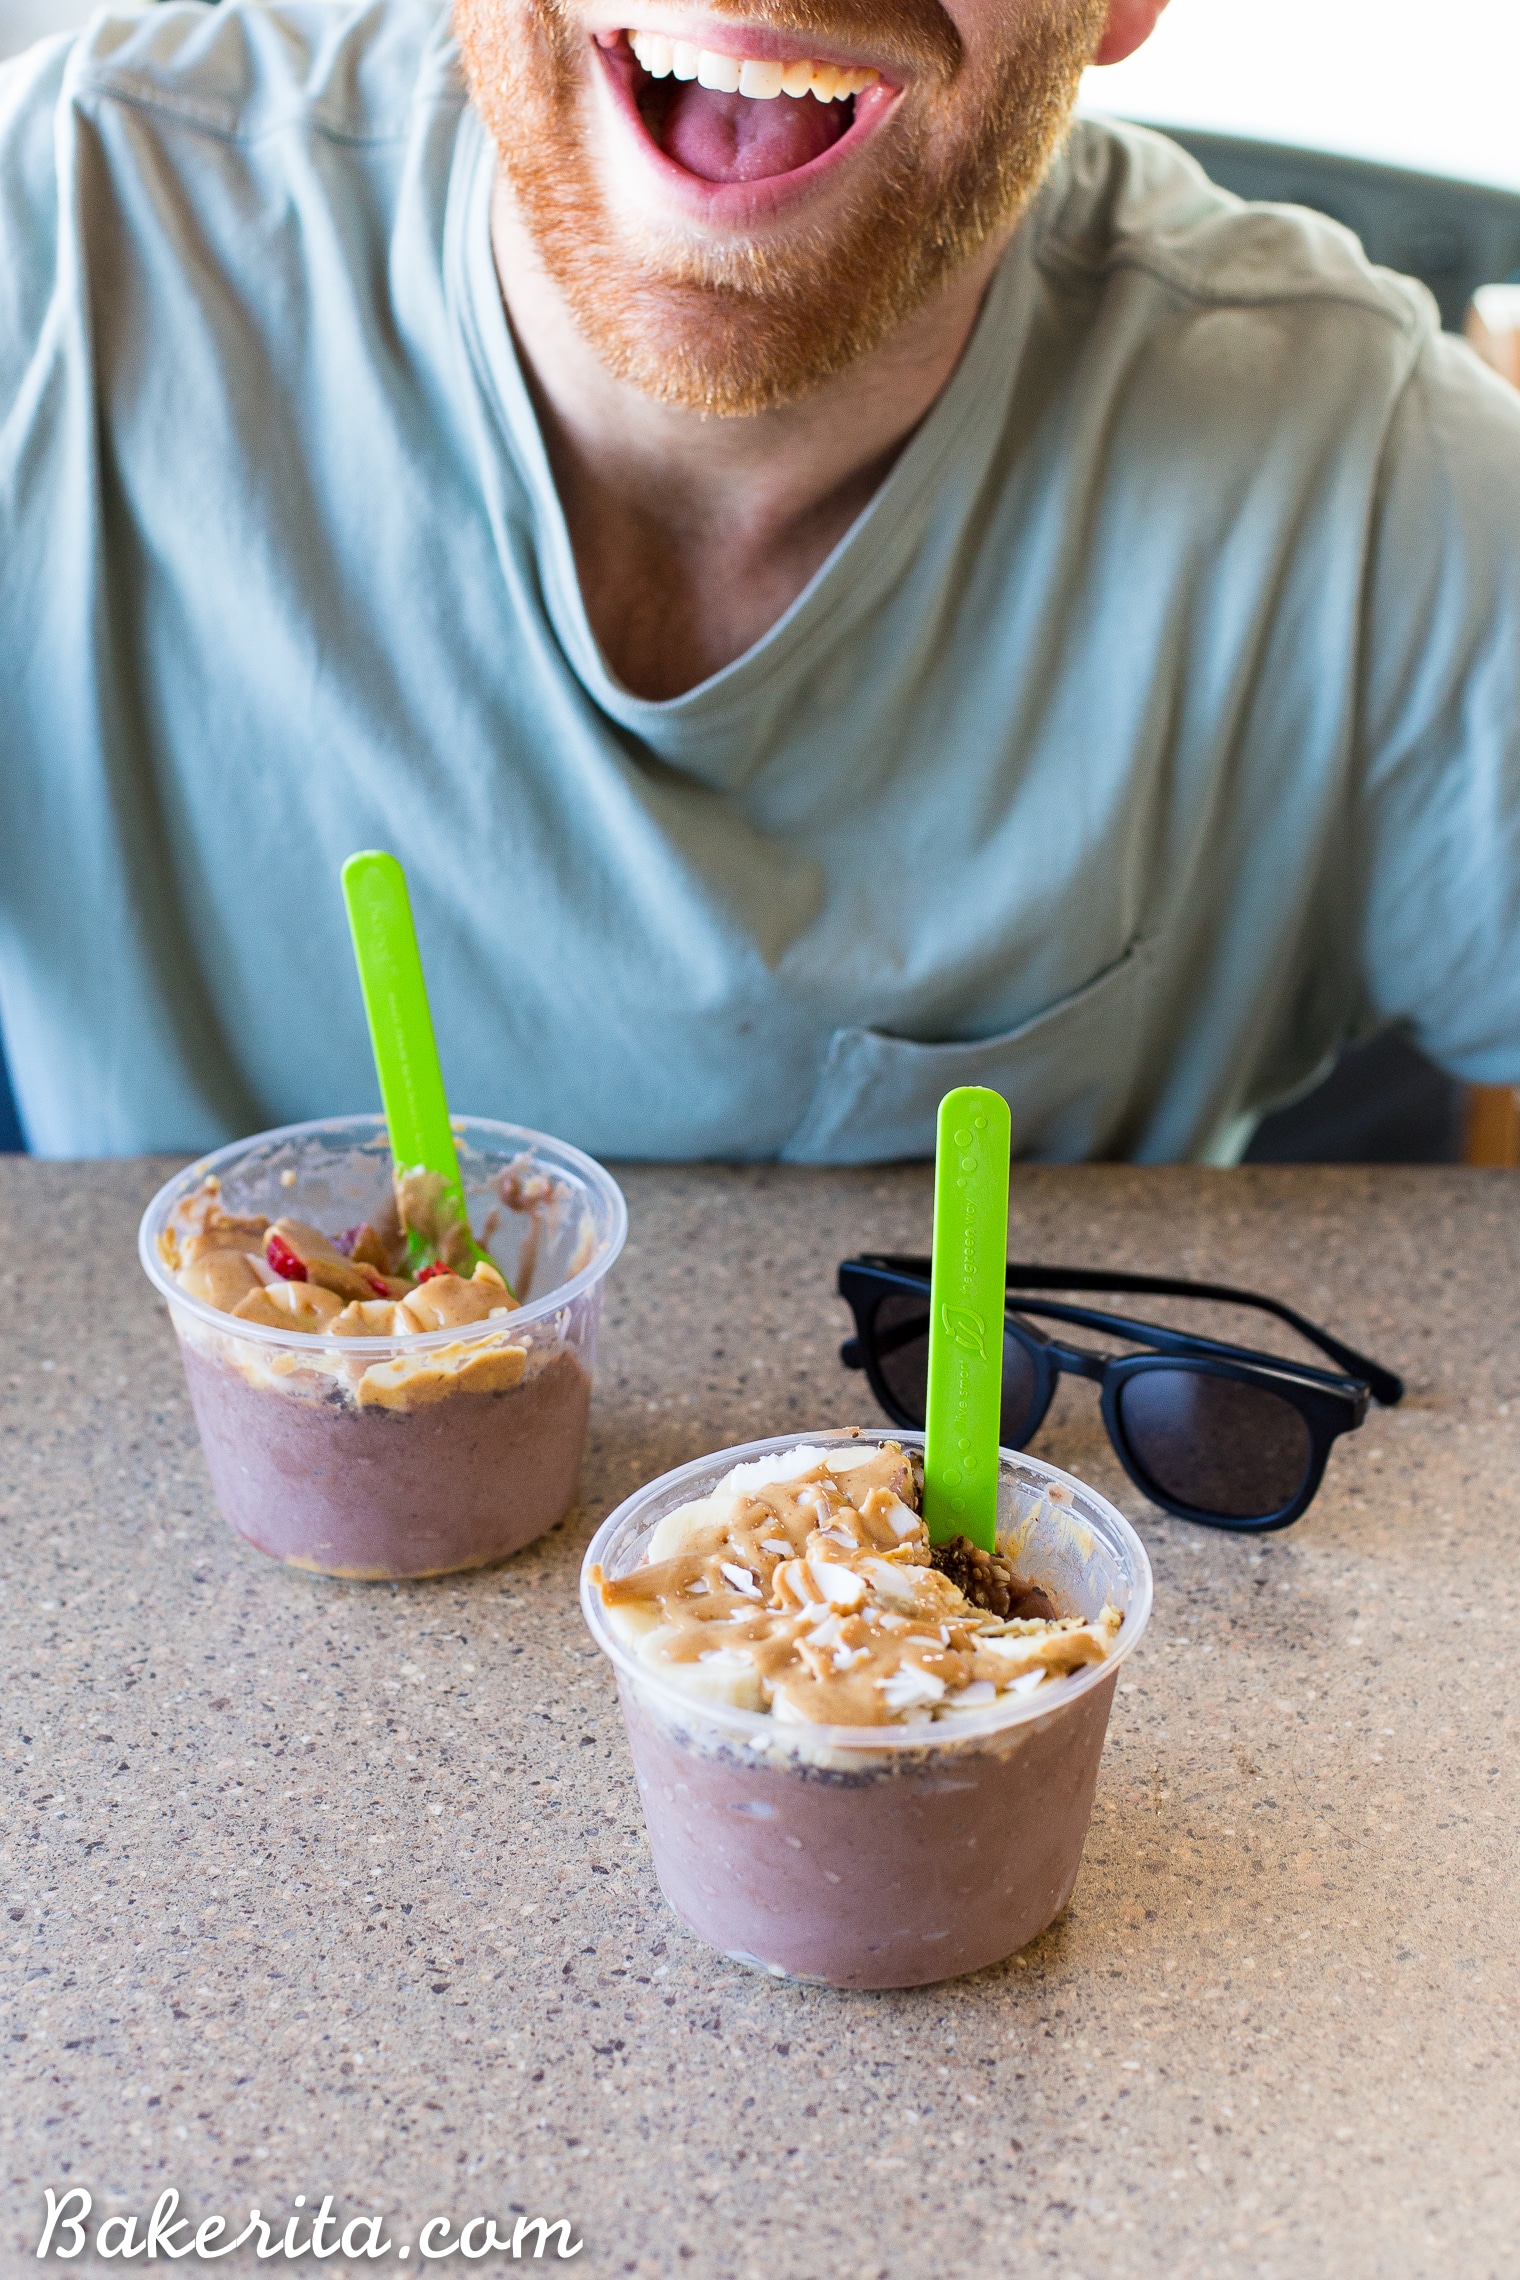 Acai Bowls from Juice My Heart, San Clemente